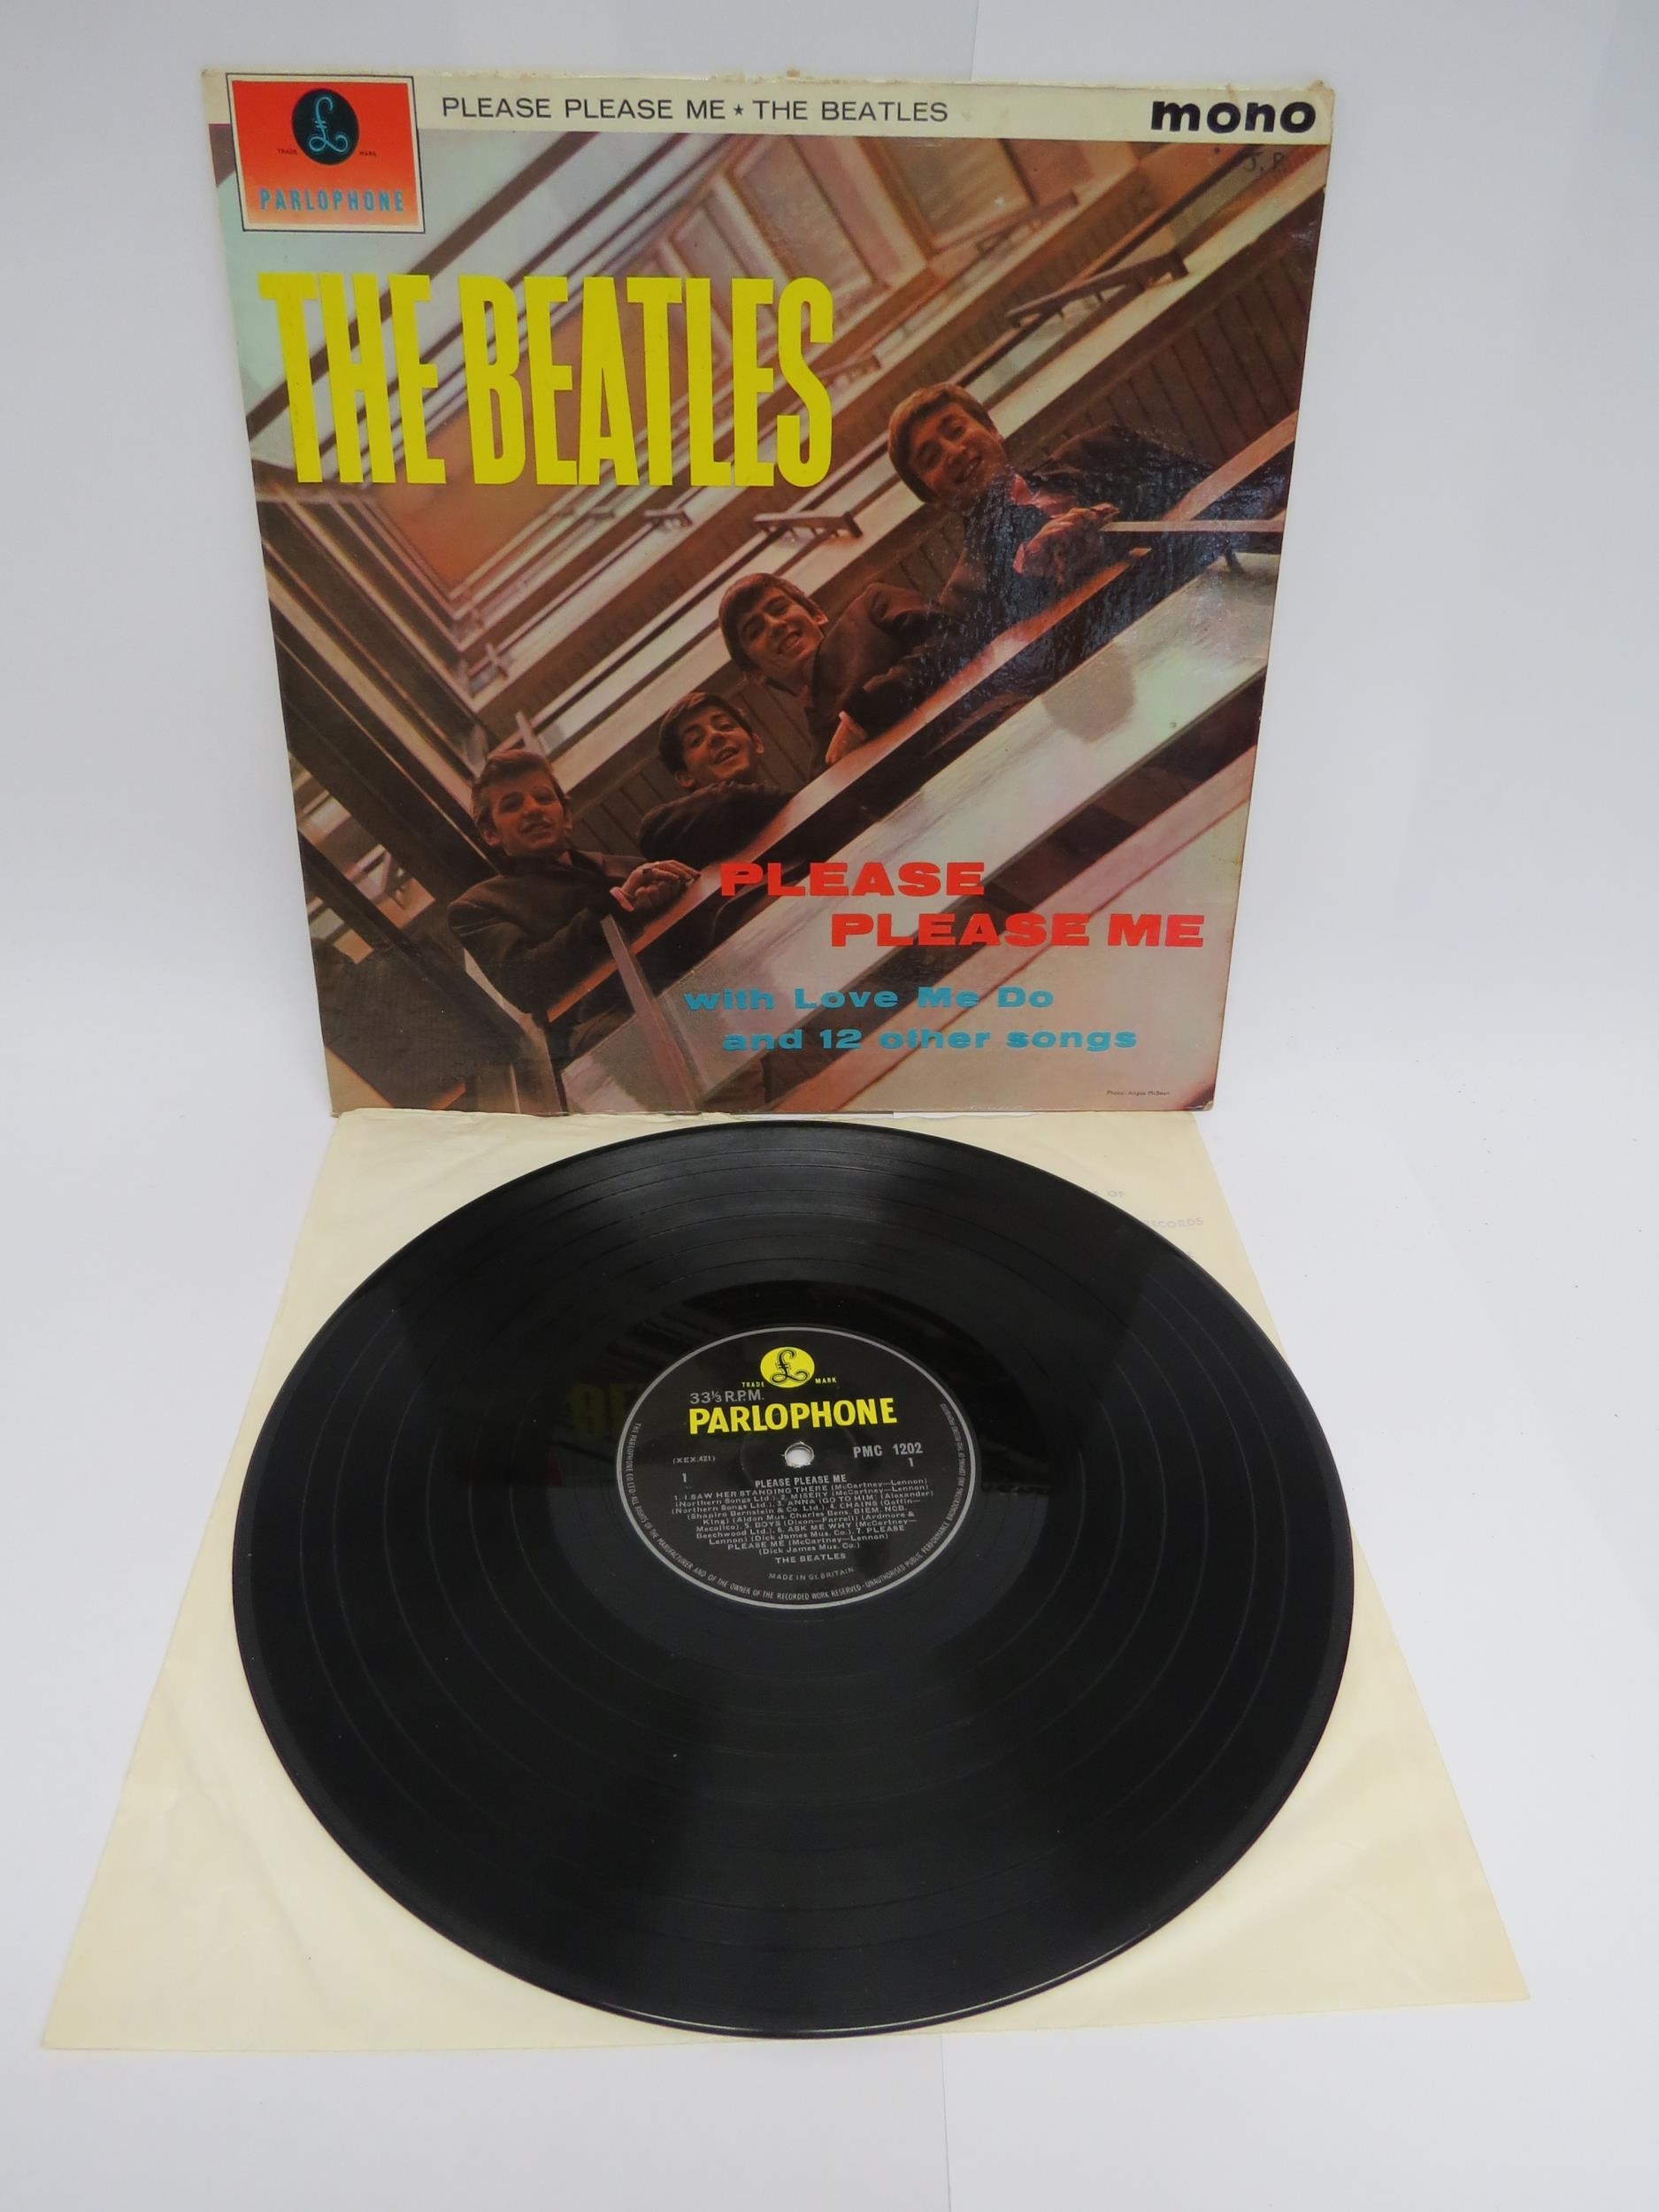 THE BEATLES: 'Please Please Me' LP, hard to find third UK mono pressing, yellow and black Parlophone